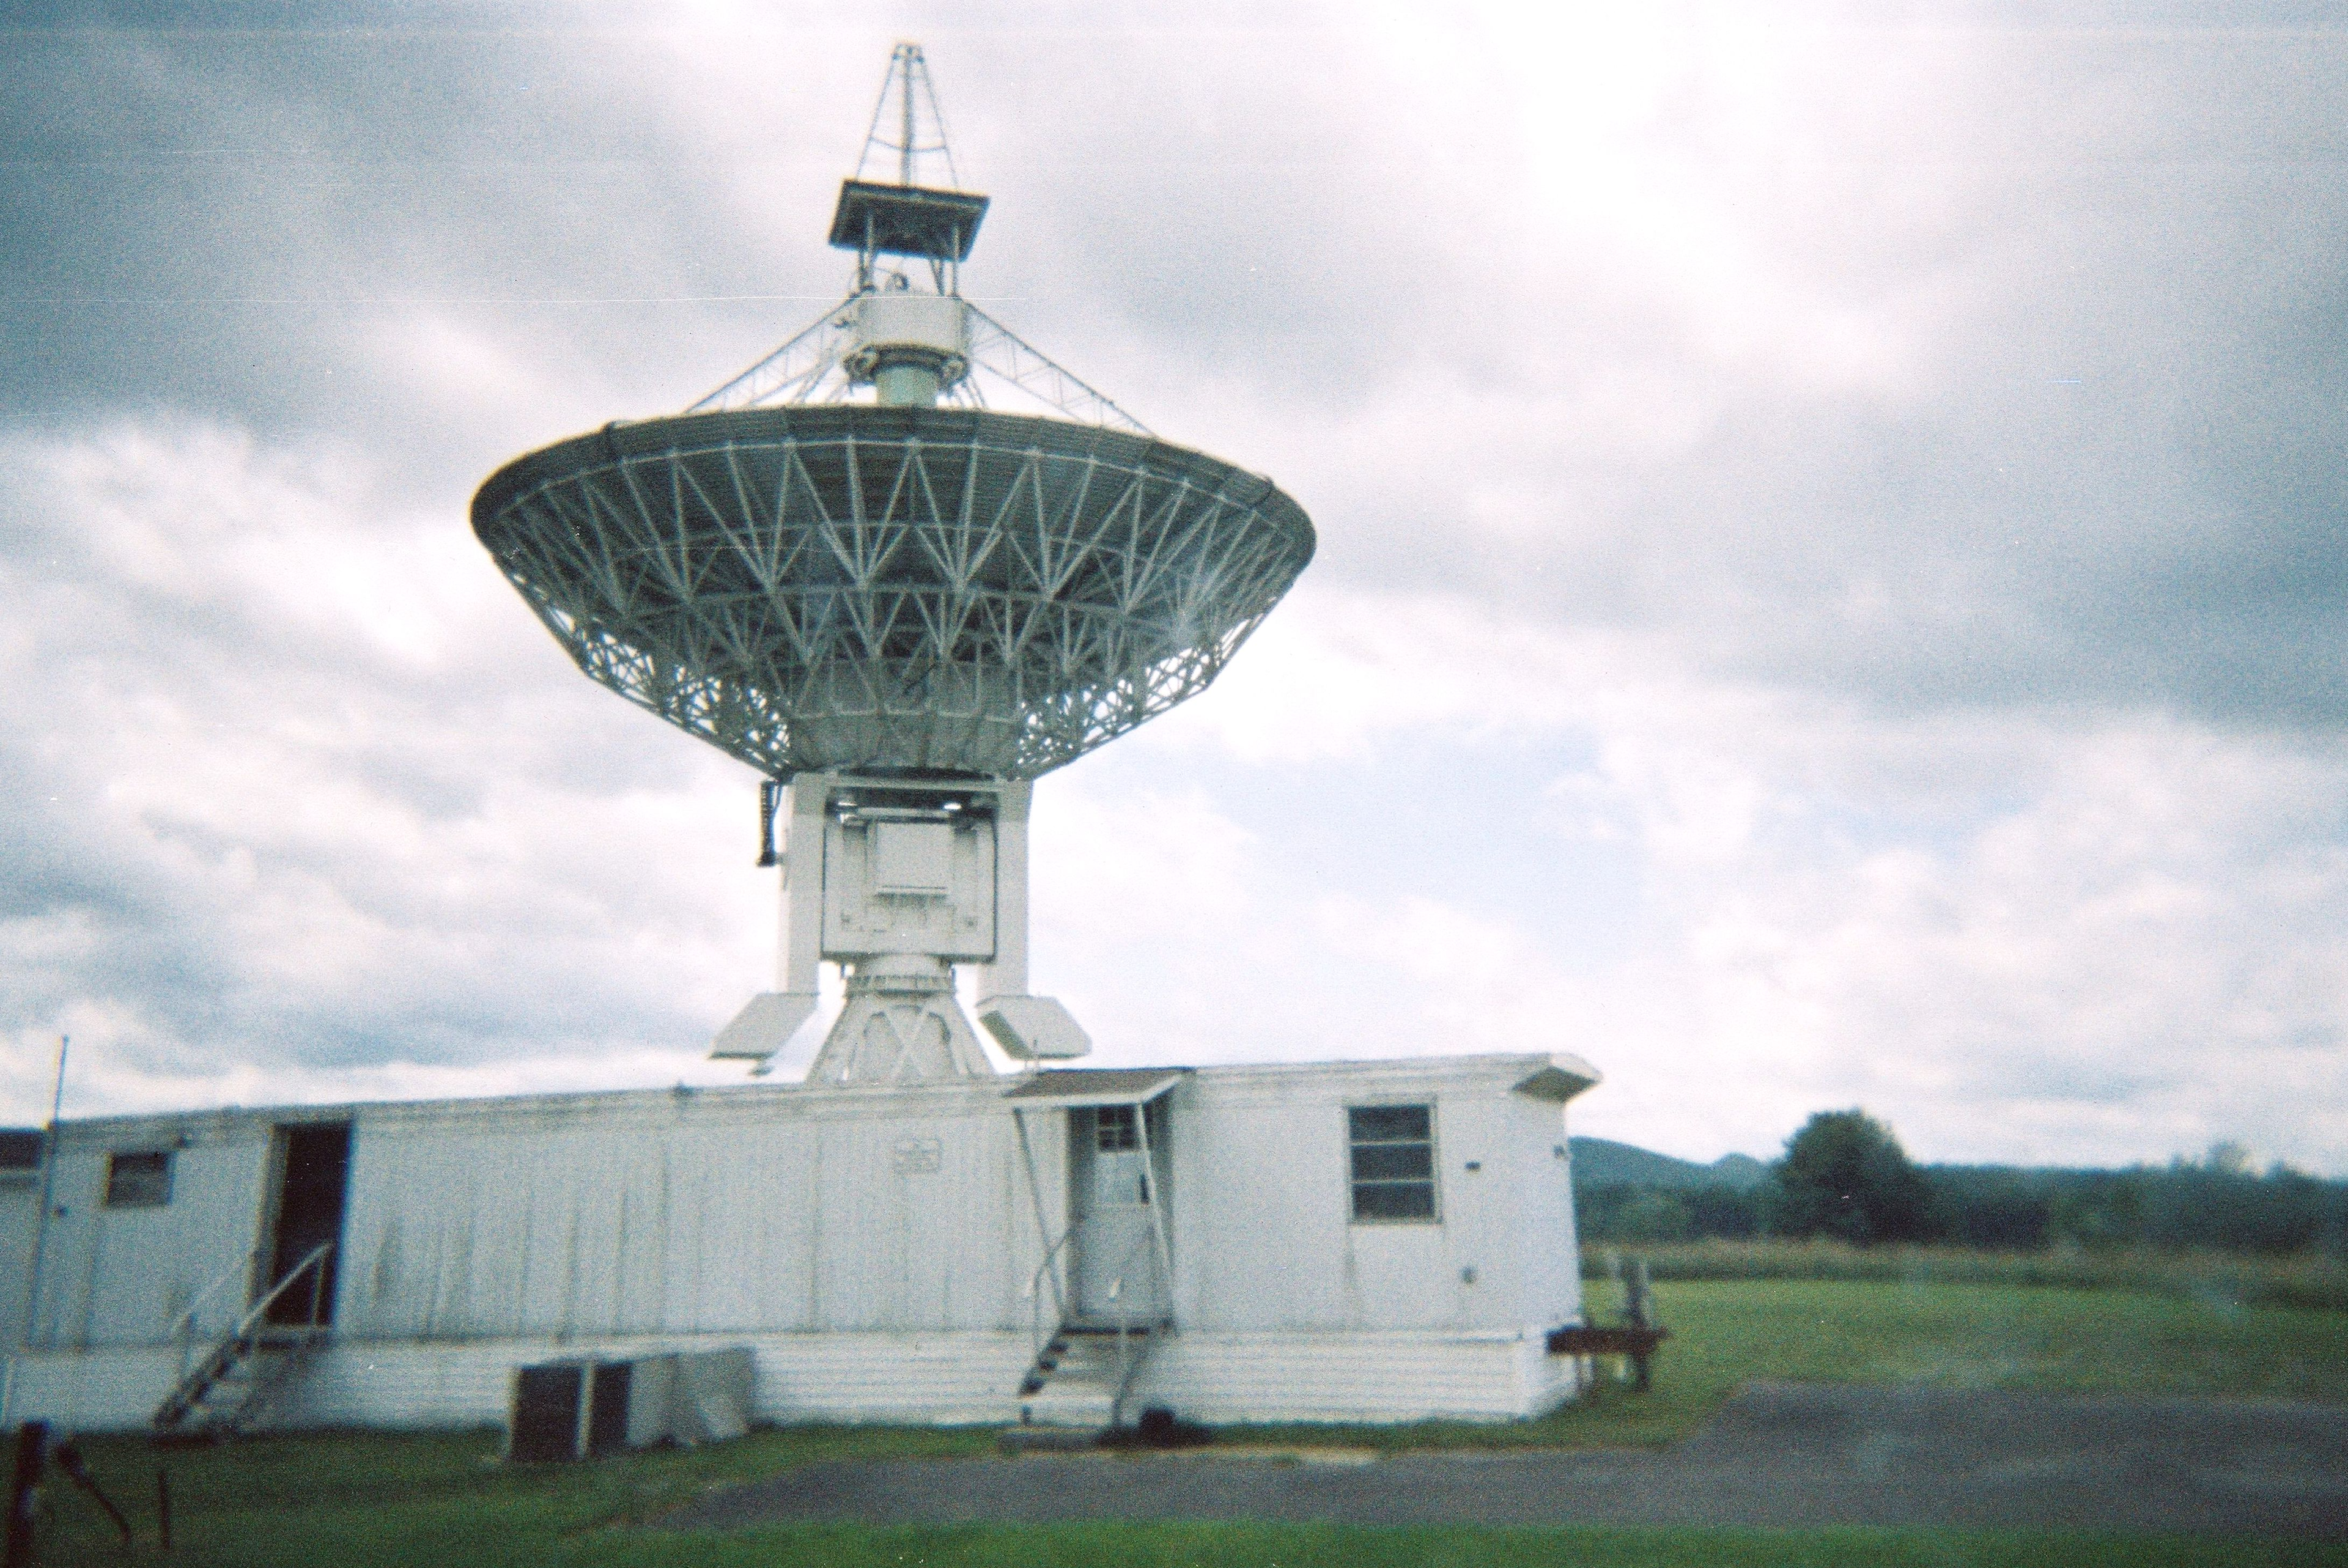 A radio telescope on top of a trailer